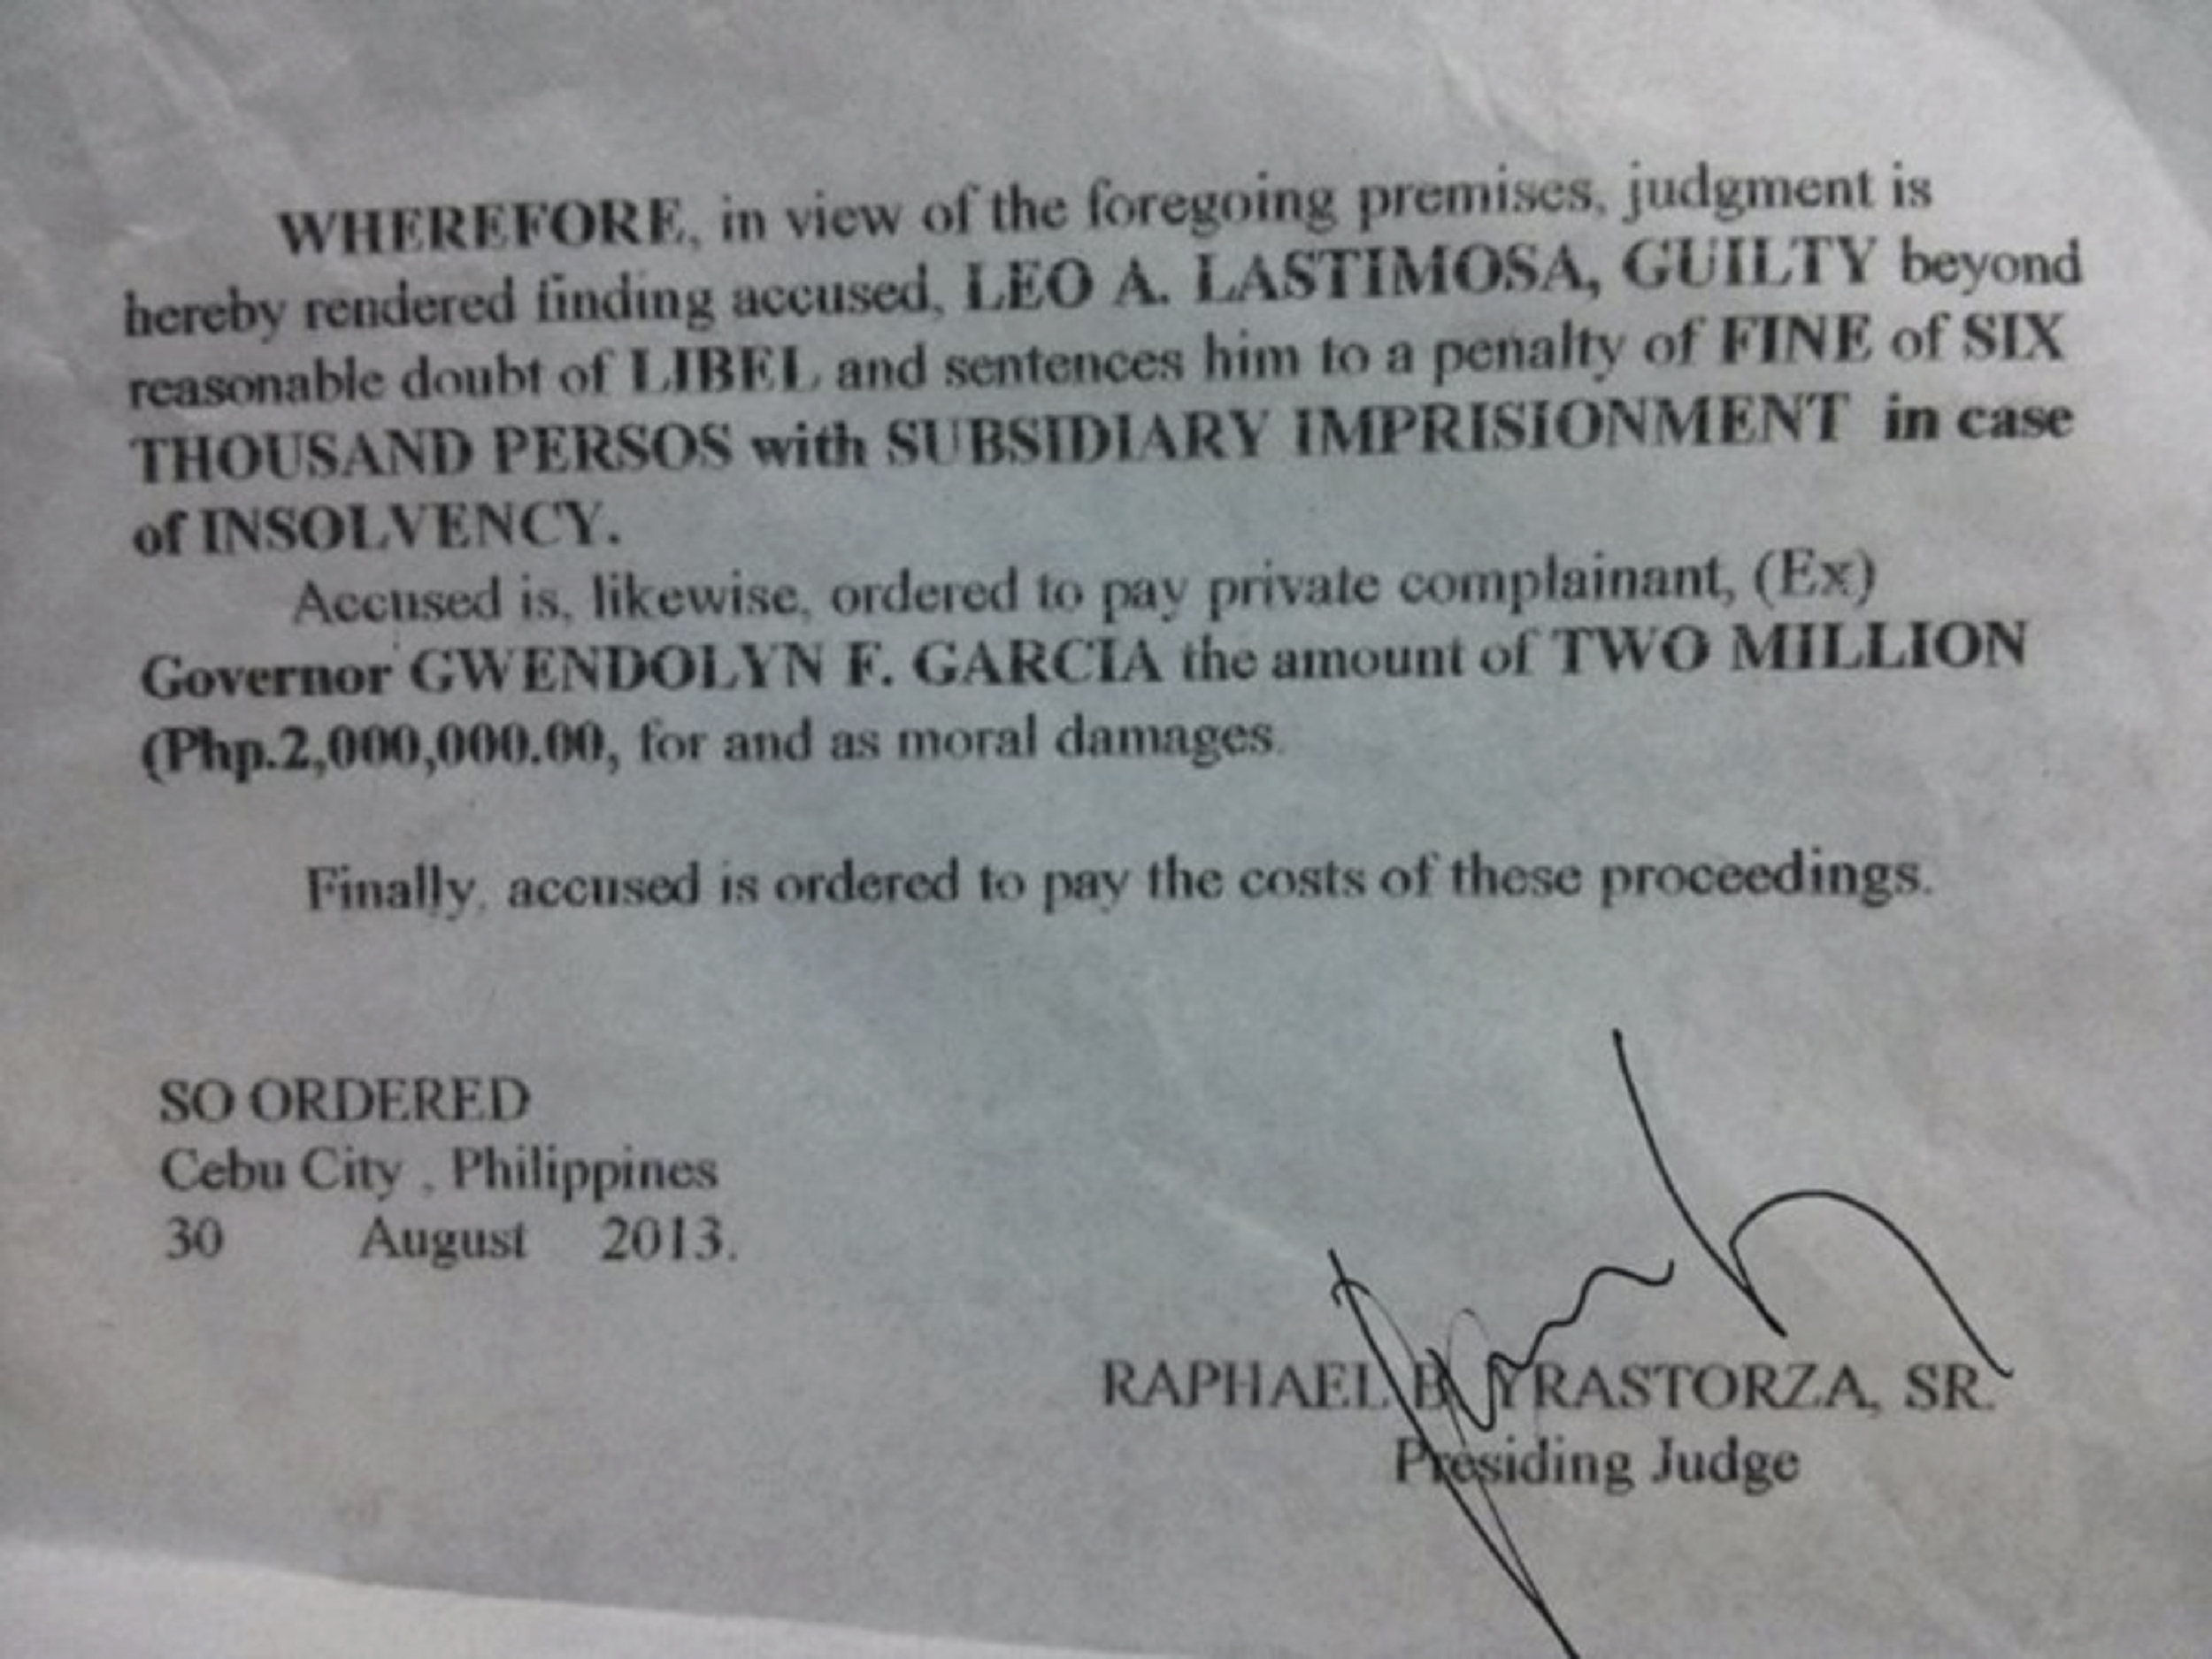 The court decision posted on Leo Lastimosa’s Facebook timeline (https://www.facebook.com/photo.php?fbid=10151878578158023)